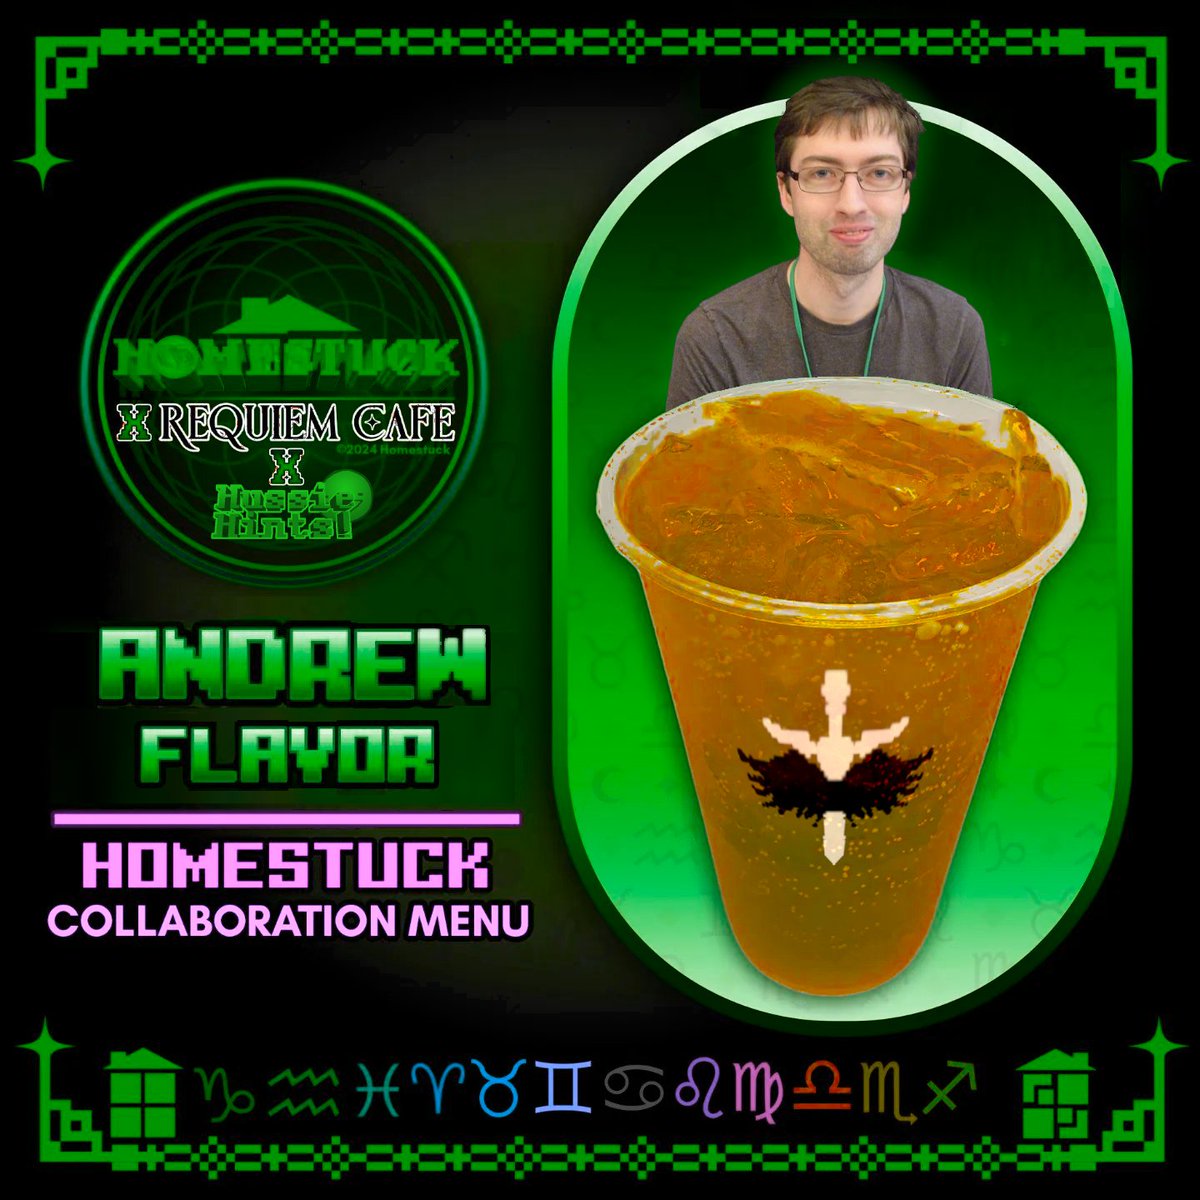 I am proud to announce a Hidden Flavor available at @RequiemCoffee as part of the Homestuck Event! It may only be accessable to those who ask for 'Andrew's Astringency' at checkout on a Green Night 💡 First To Order will receive a Collector's Cup signed by Myself!